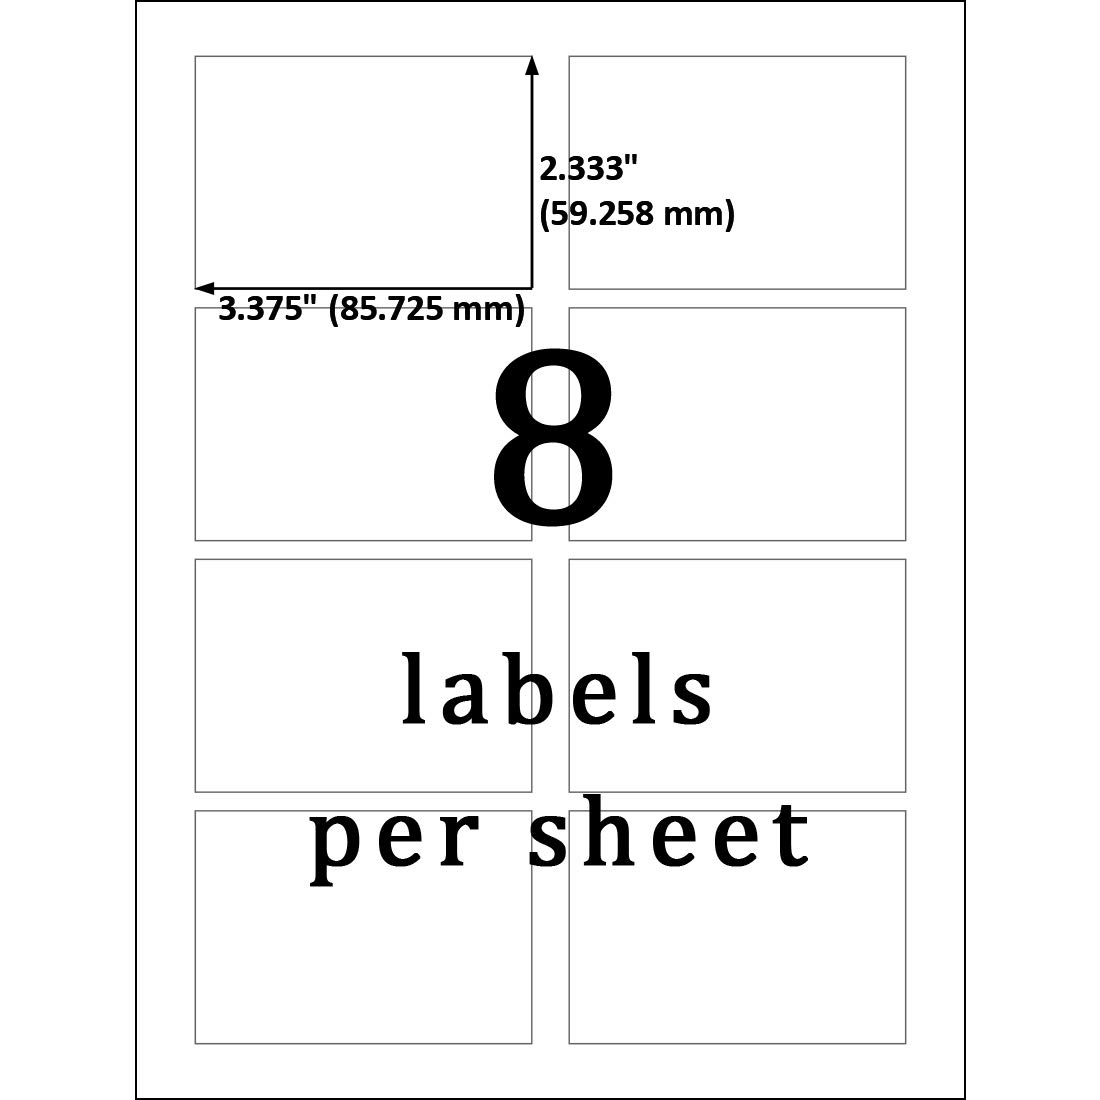 Mr-Label 221-21/21″ x 21-21/21″ Matte White Name Badges – Personalized With 8 X 3 Label Template